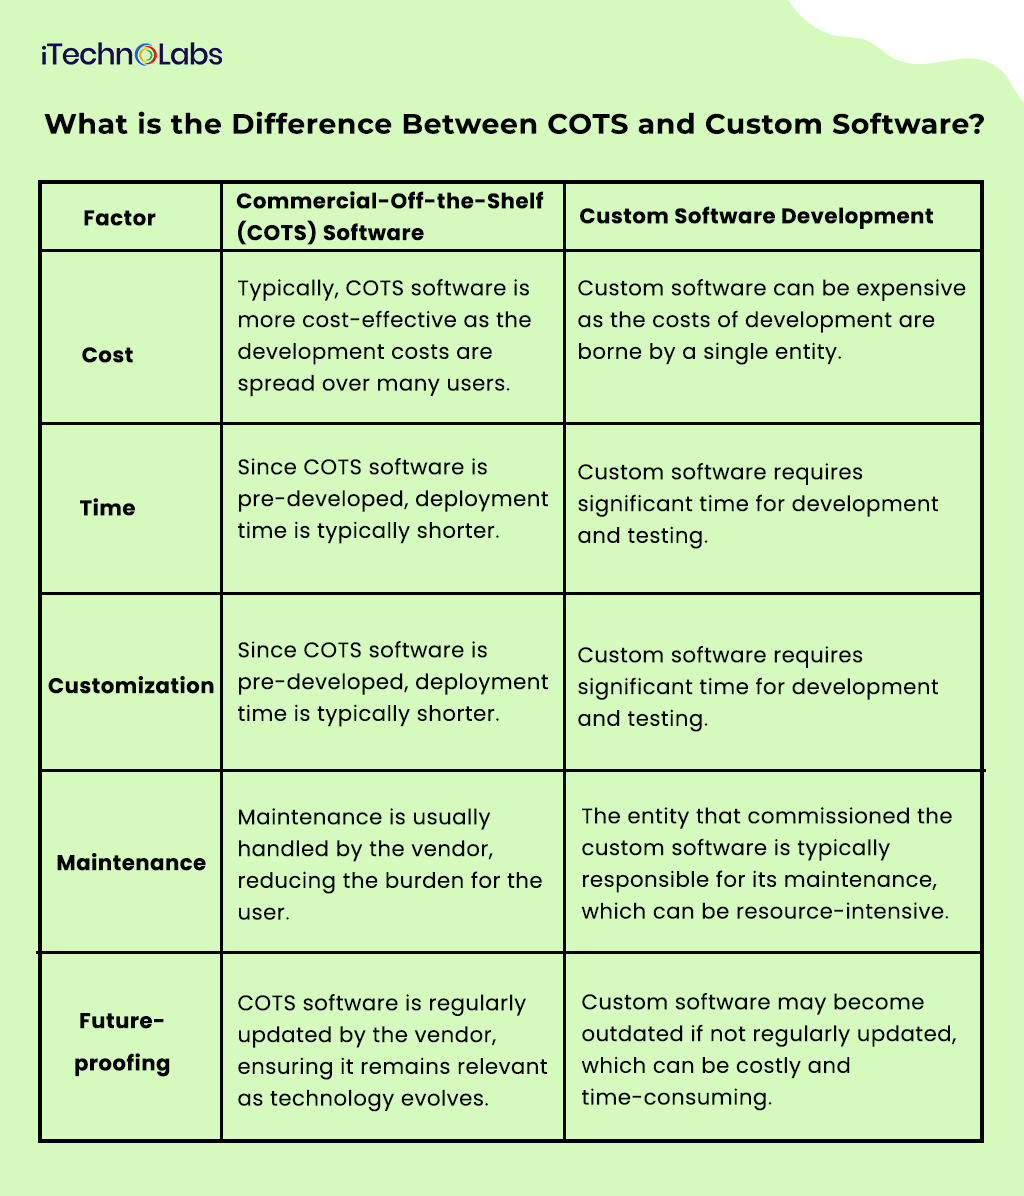 iTechnolabs-What-is-the-Difference-Between-COTS-and-Custom-Software